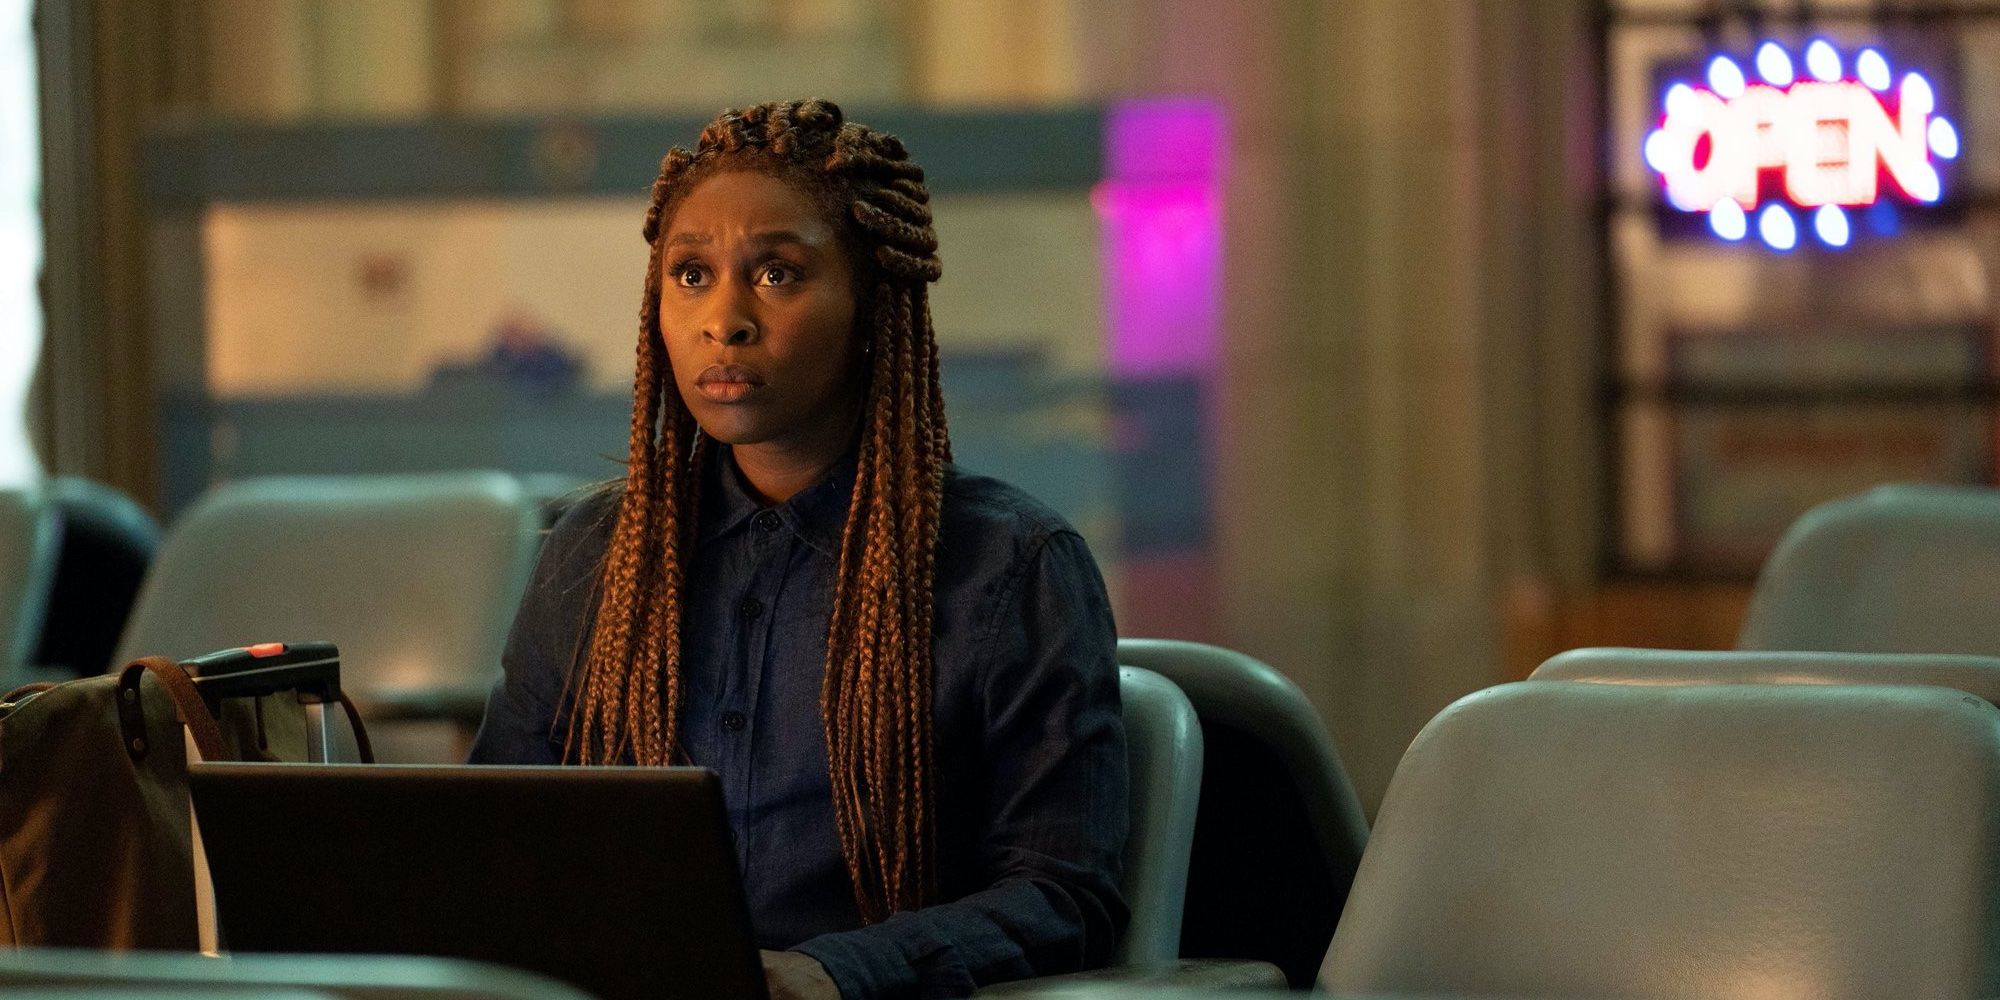 Cynthia Erivo in The Outsider HBO